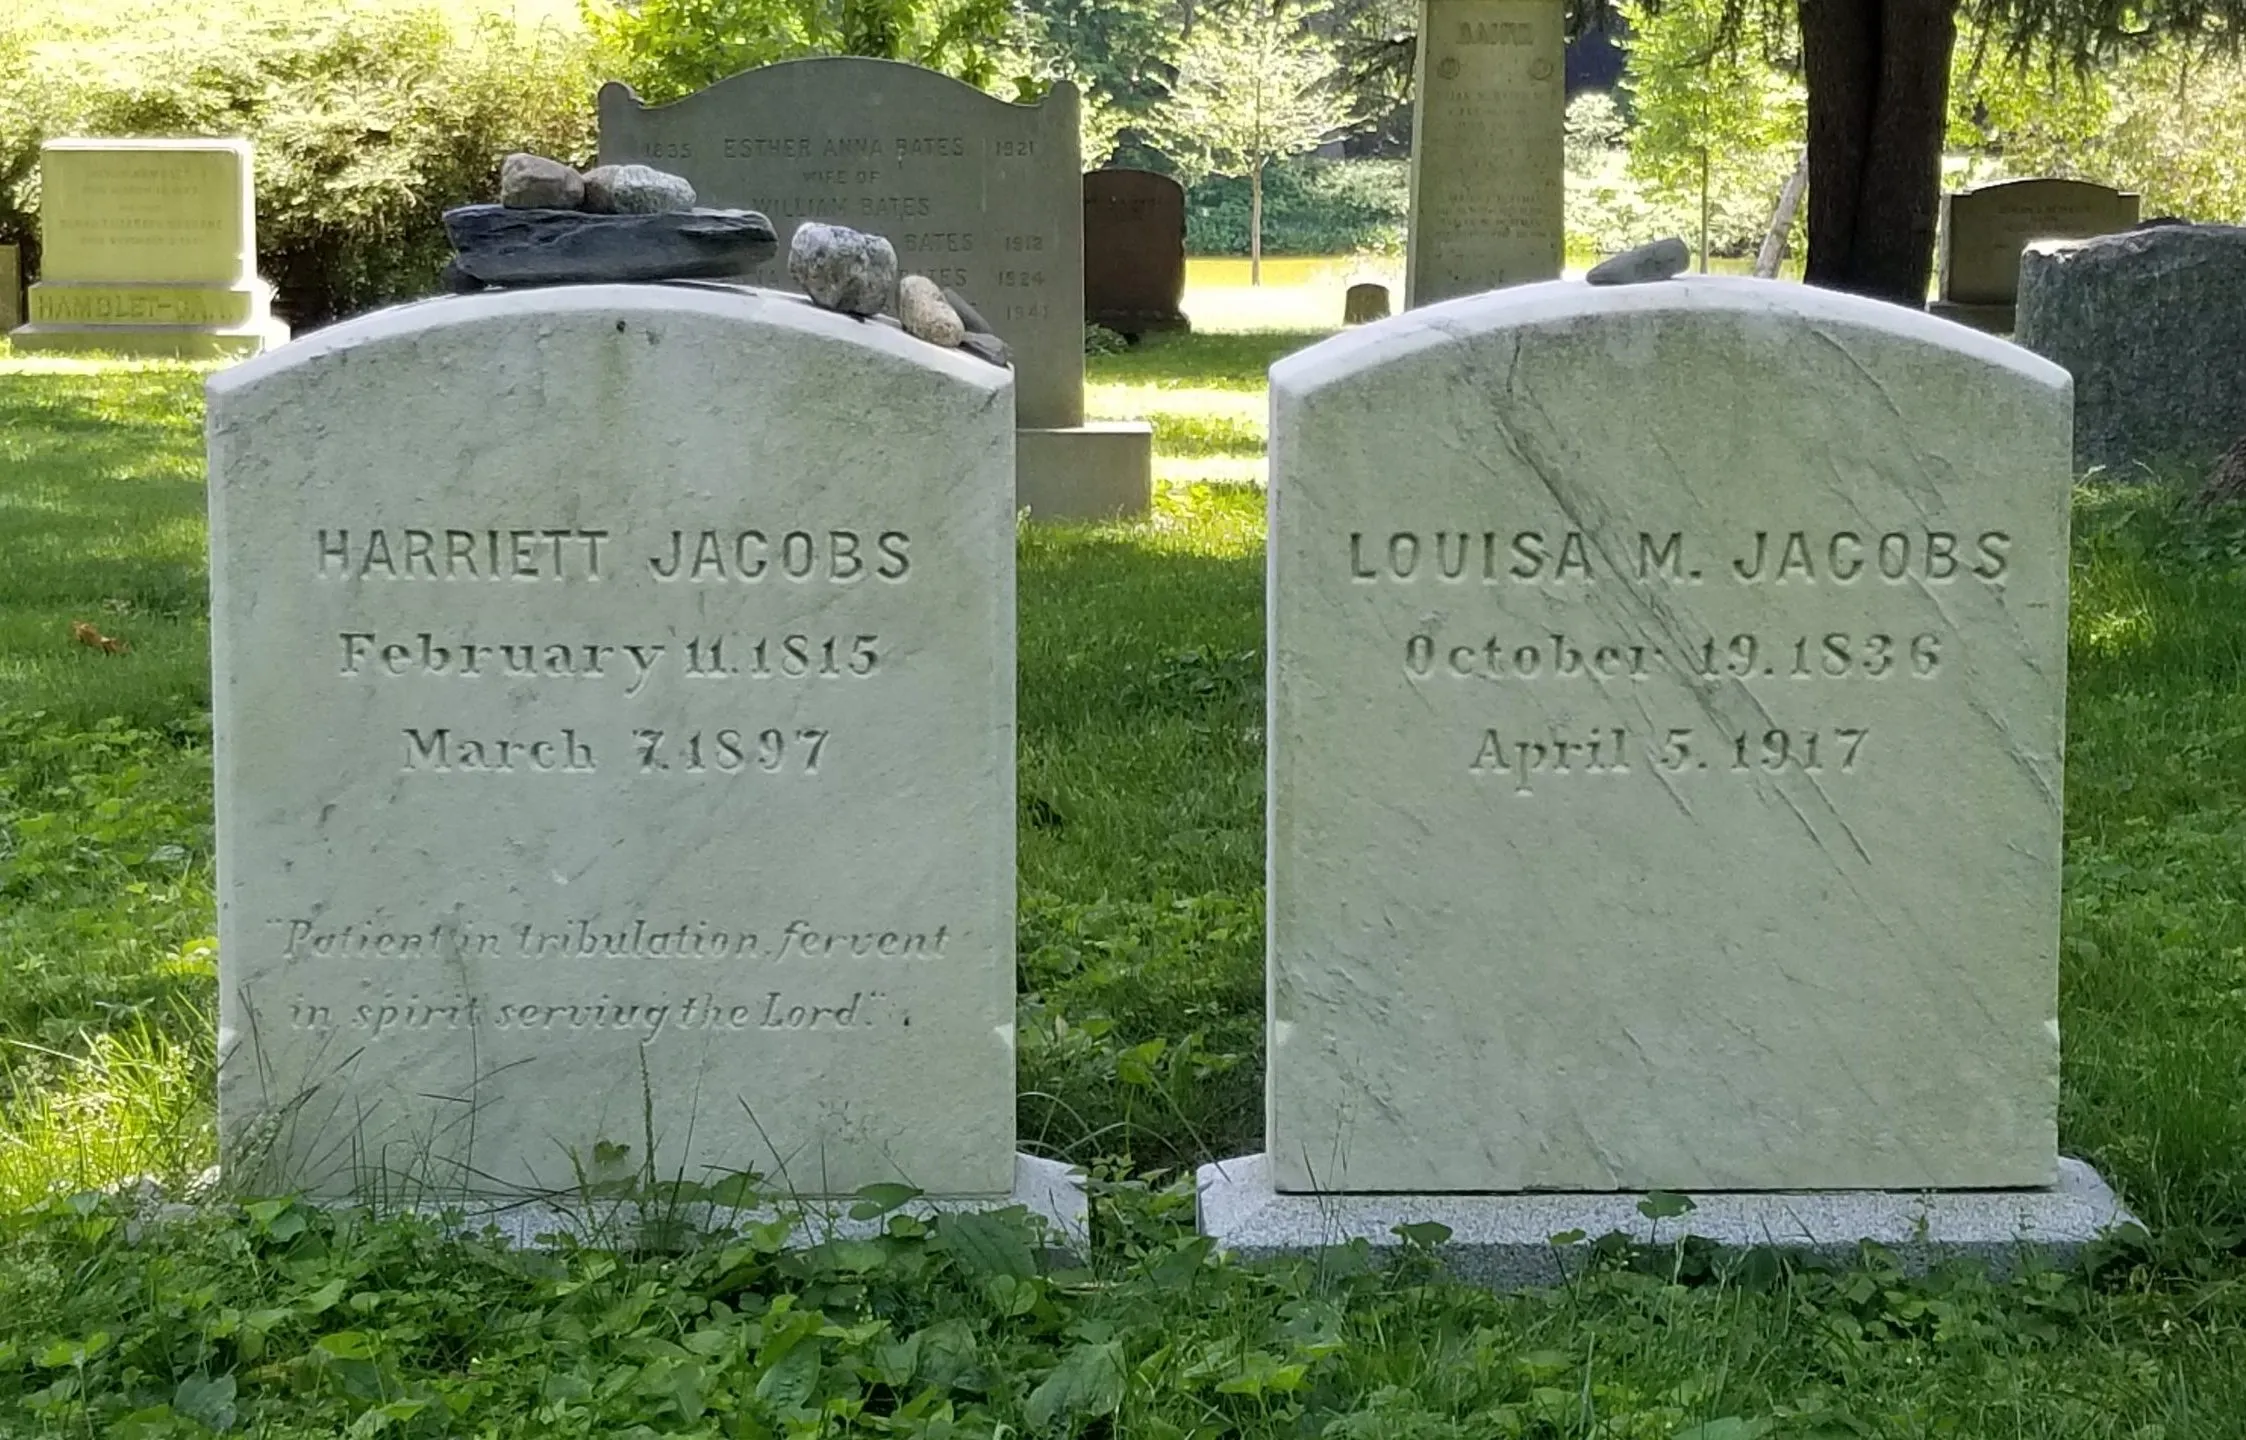 Two gravestones next to each other made of clean, white marble.